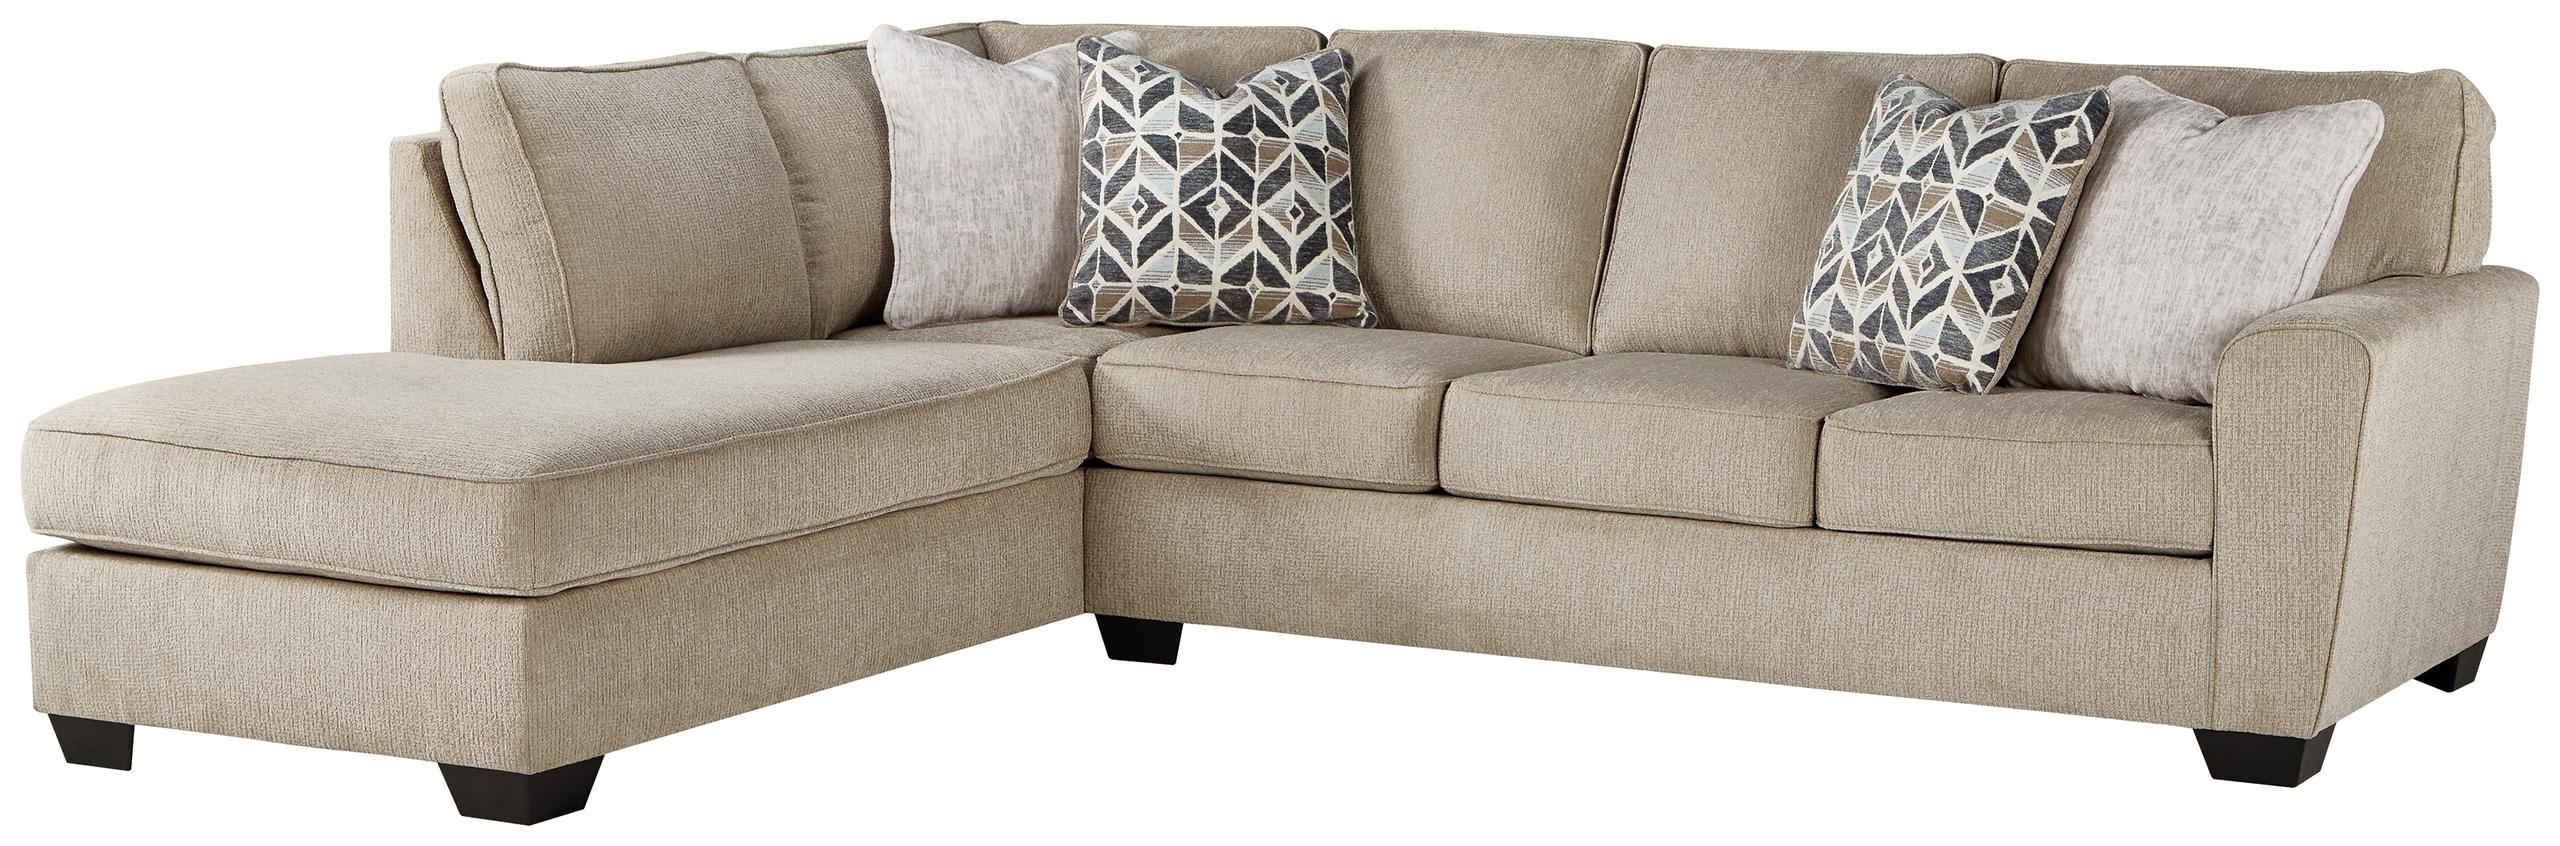 ASHLEY FURNITURE 80305S1 Decelle 2-piece Sectional With Chaise